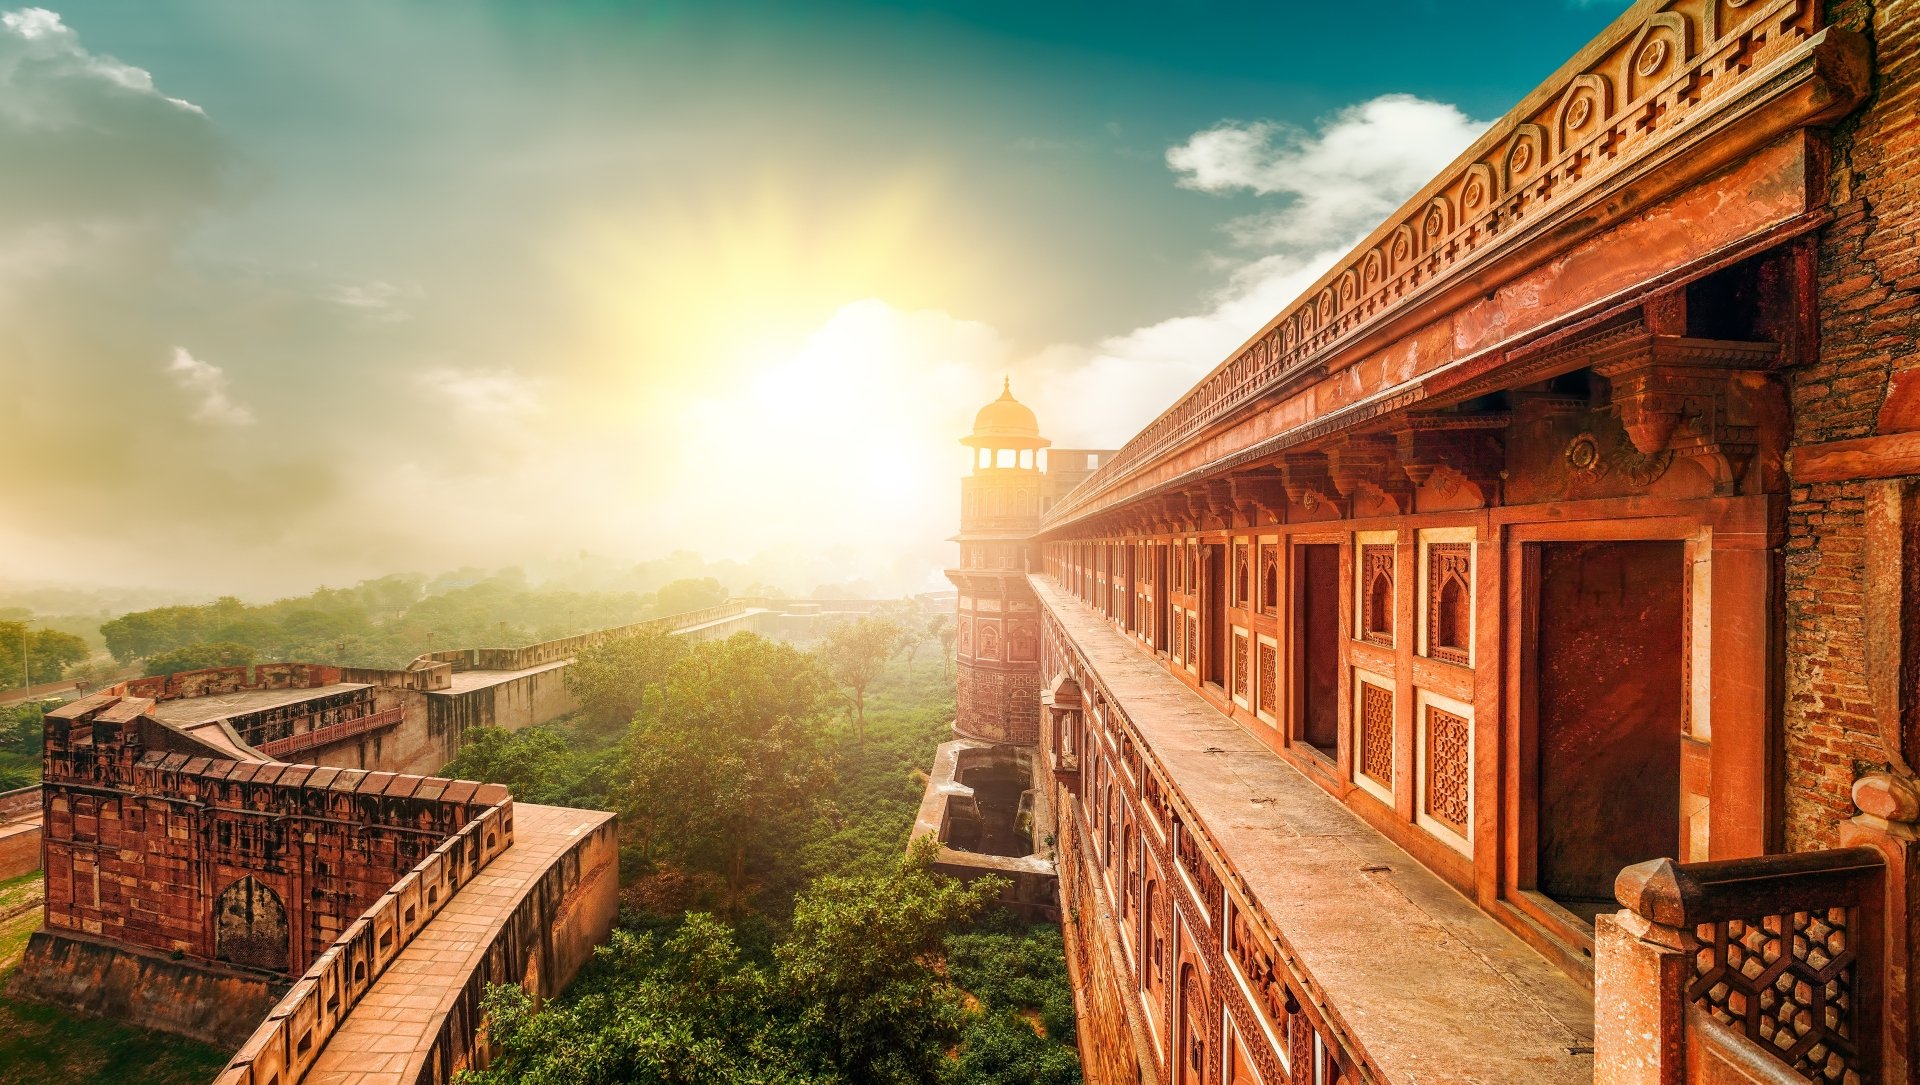 Agra Fort in the city of Agra, India, UNESCO heritage